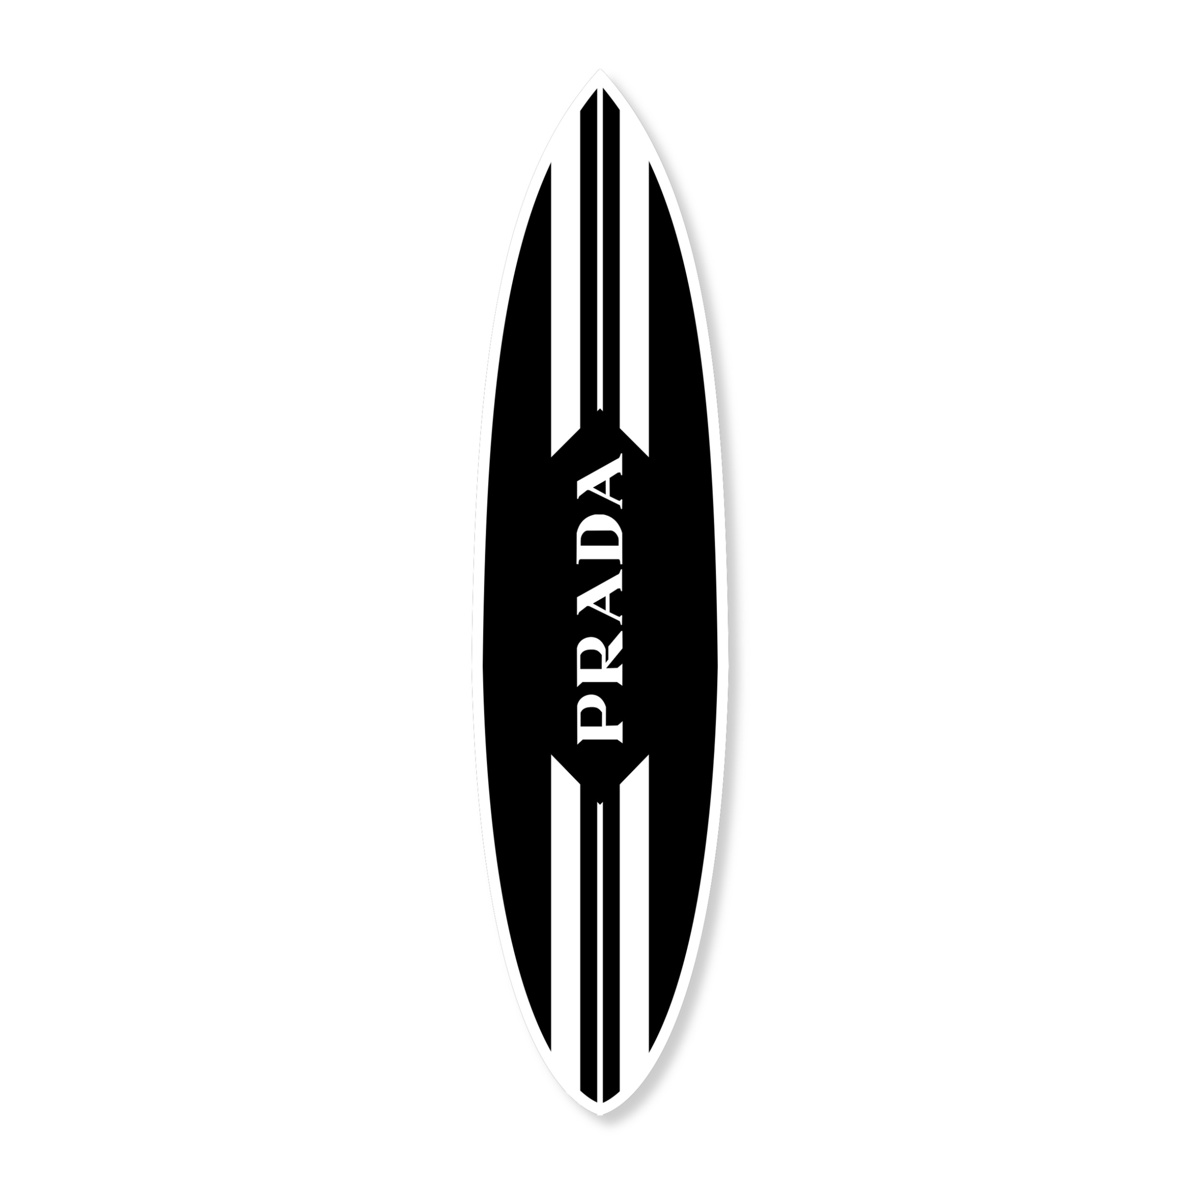 Milano Surfboard | Wall Art by The Oliver Gal